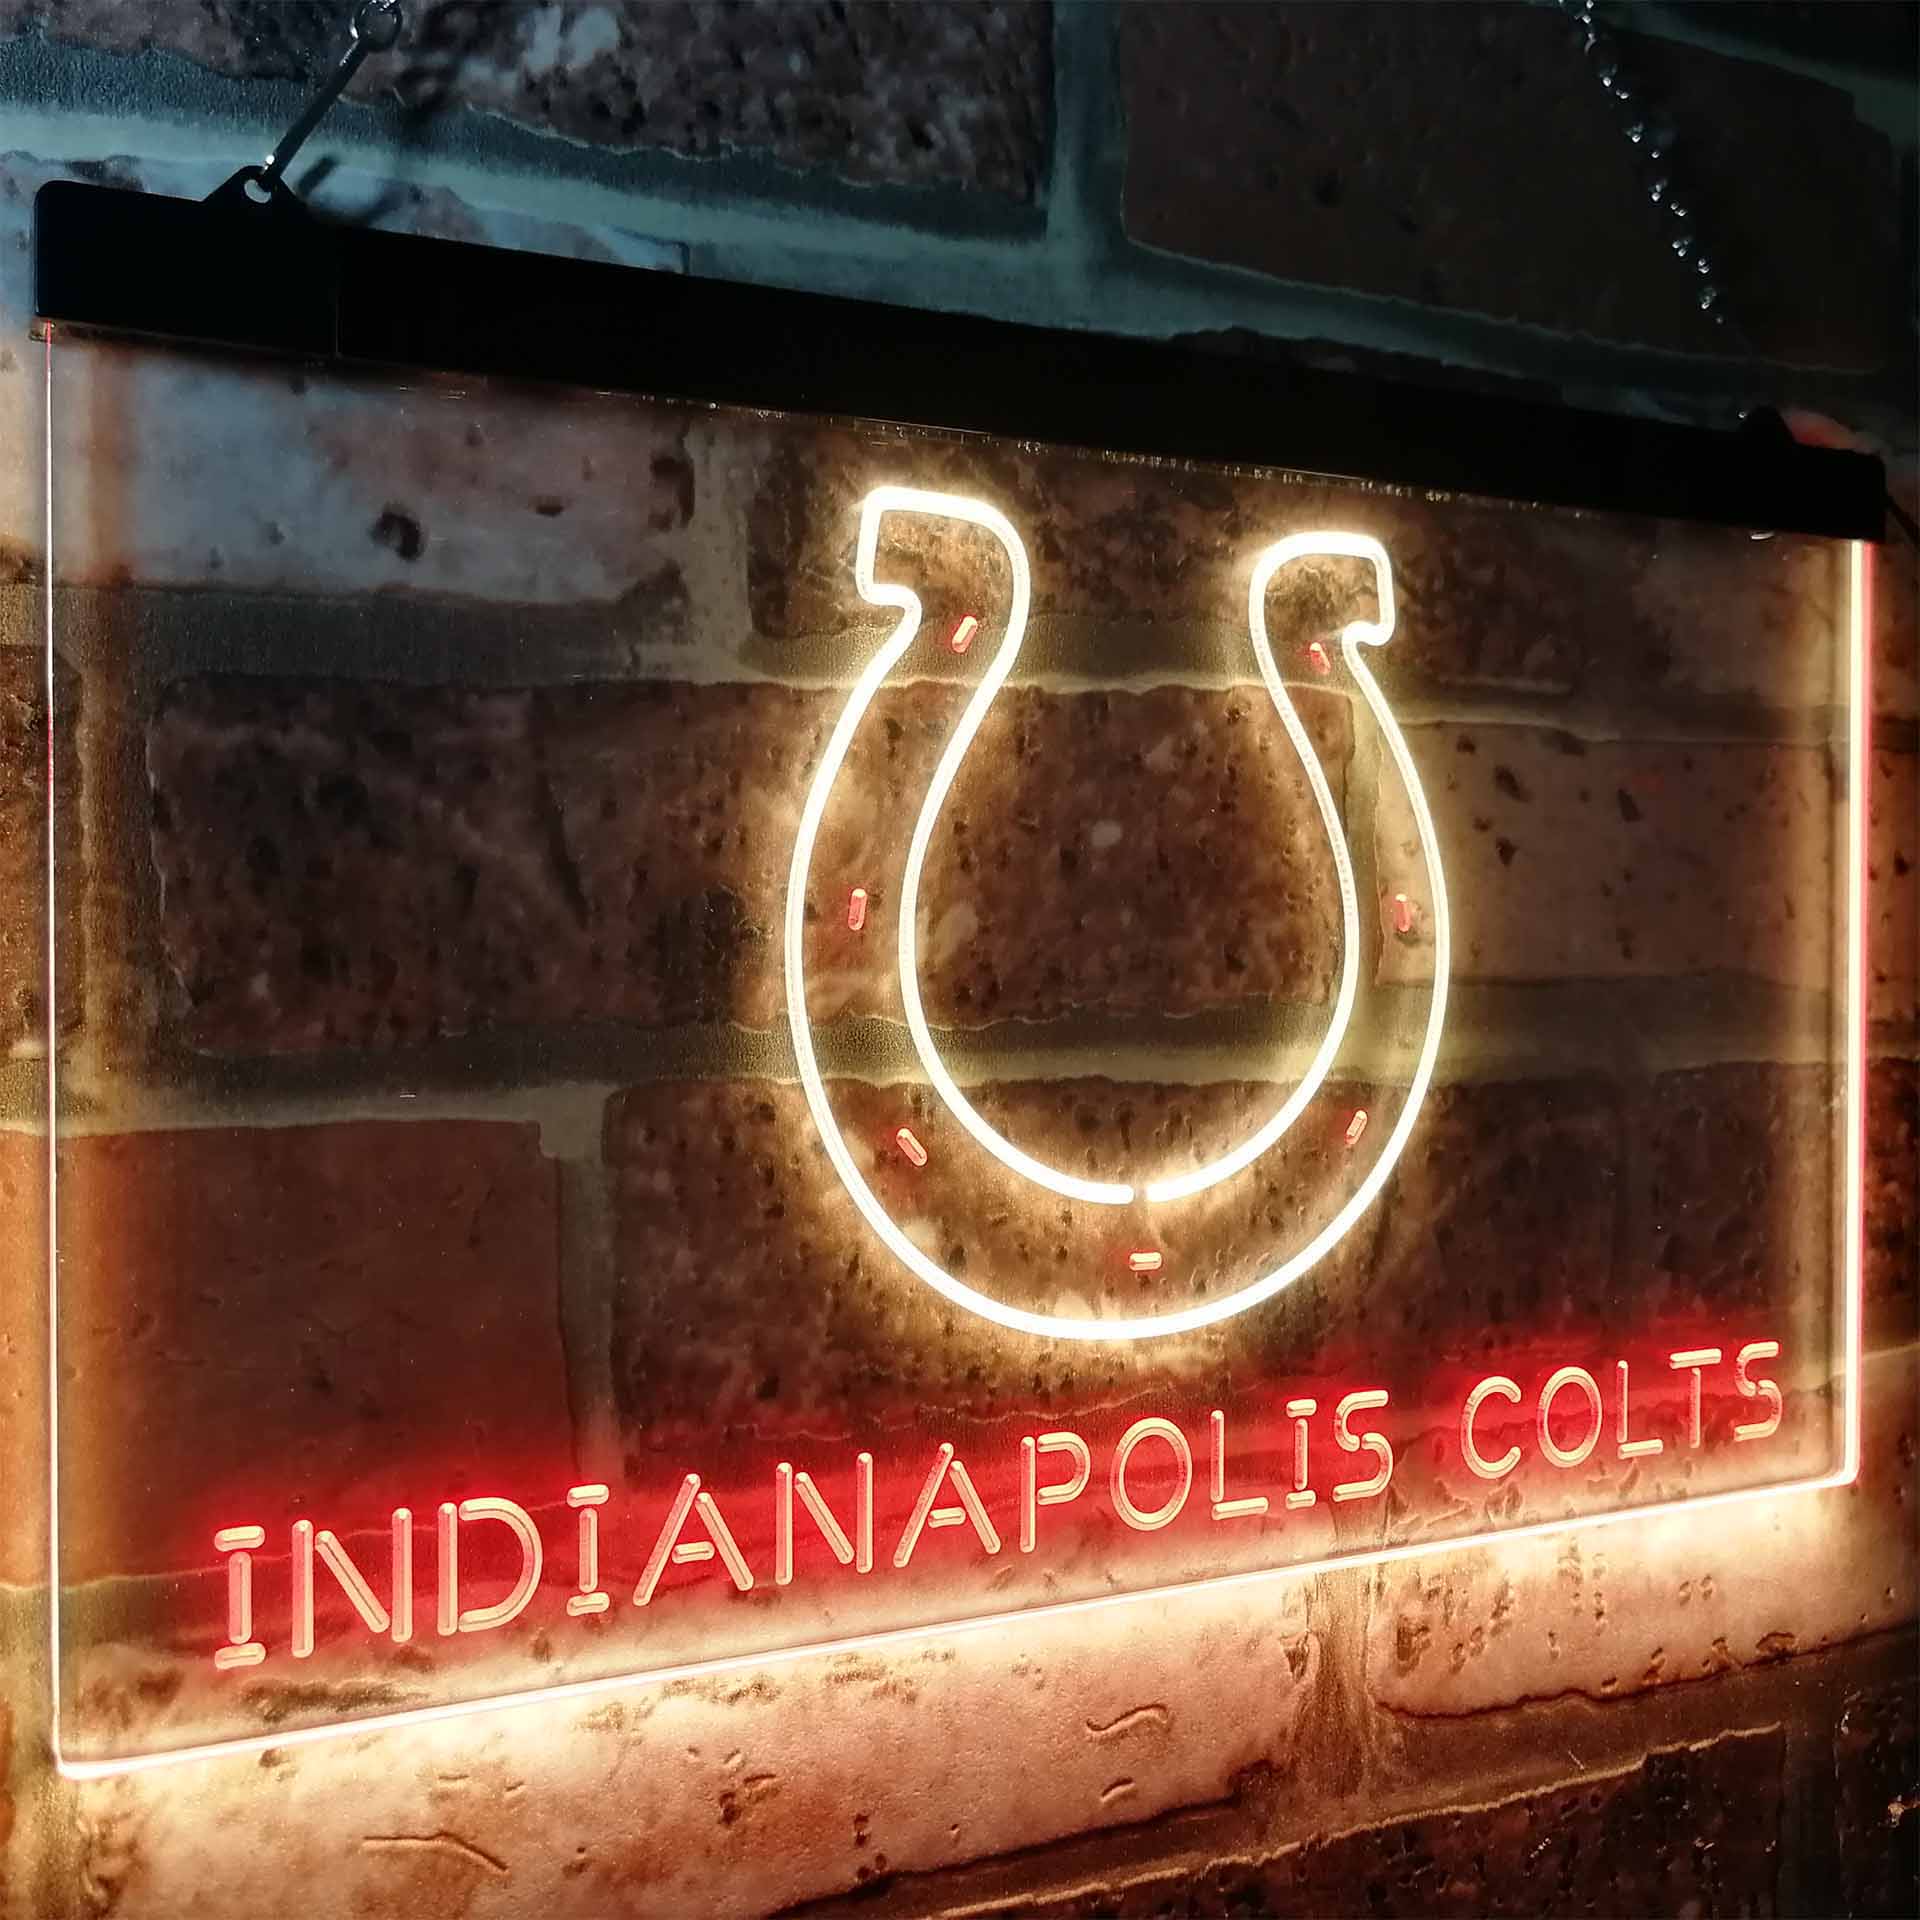 Indianapolis Colts Decor LED Neon Sign